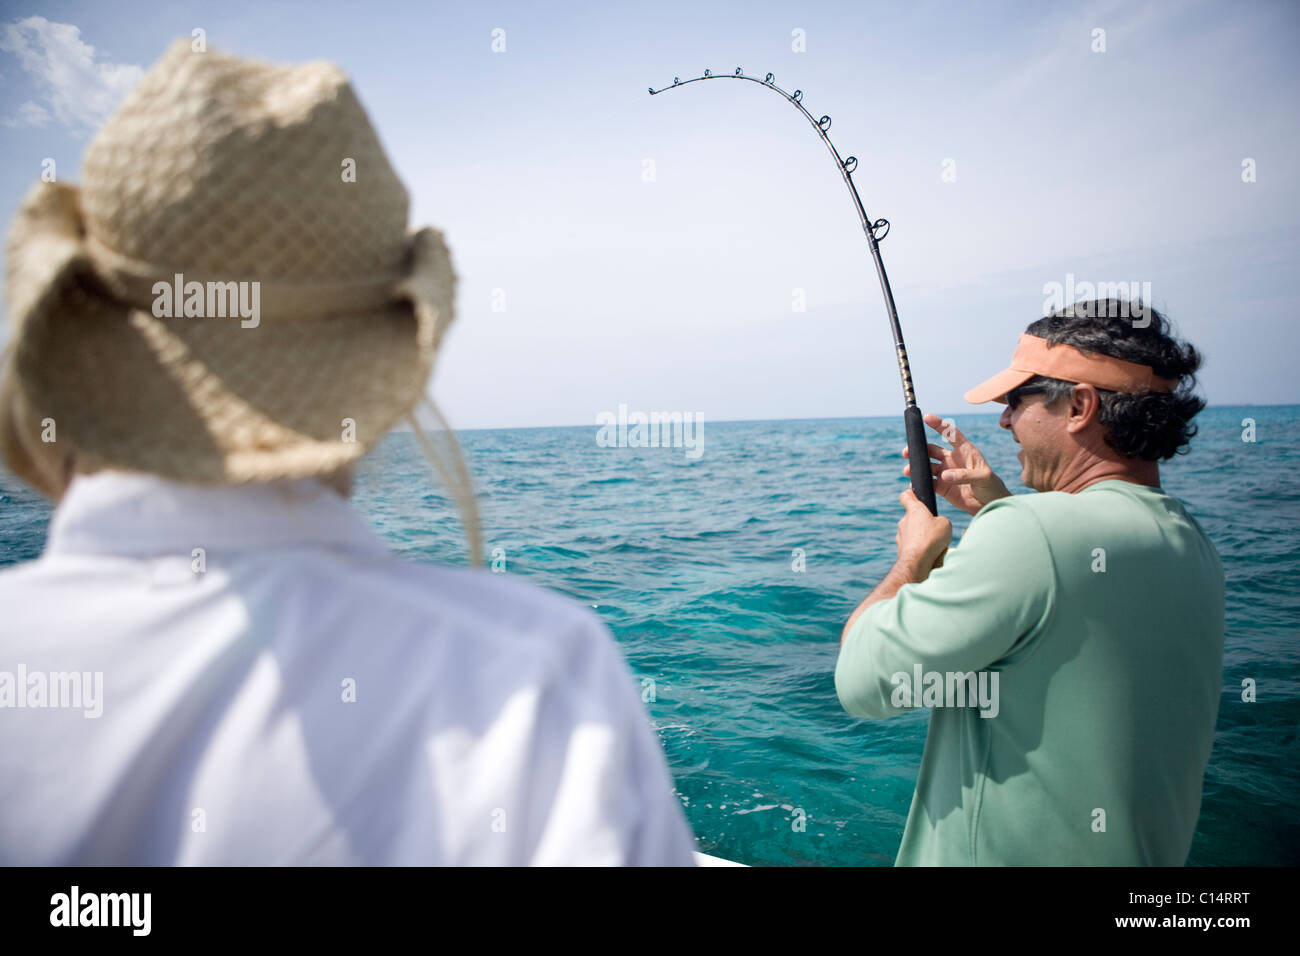 A fisherman reels in a fish as his pole bends down during the fight. Stock Photo